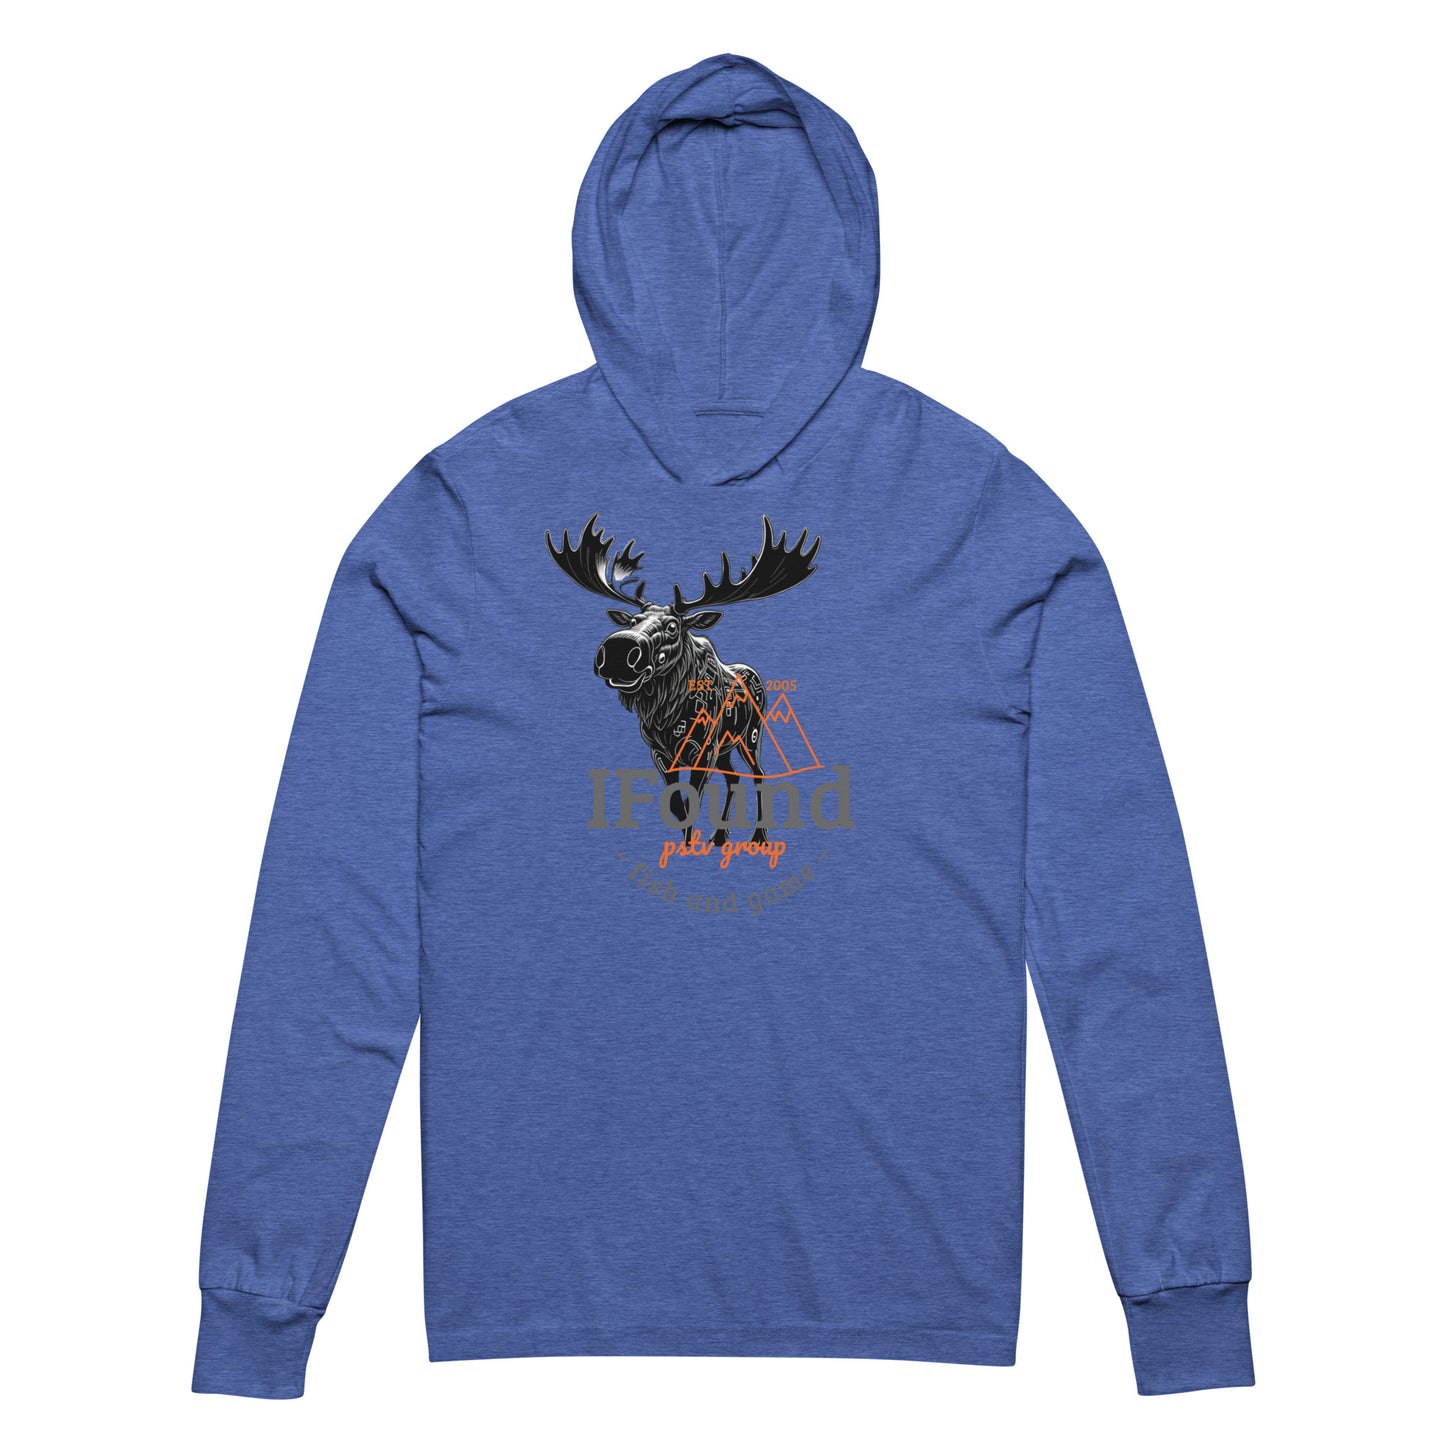 fish&game Hooded long-sleeve